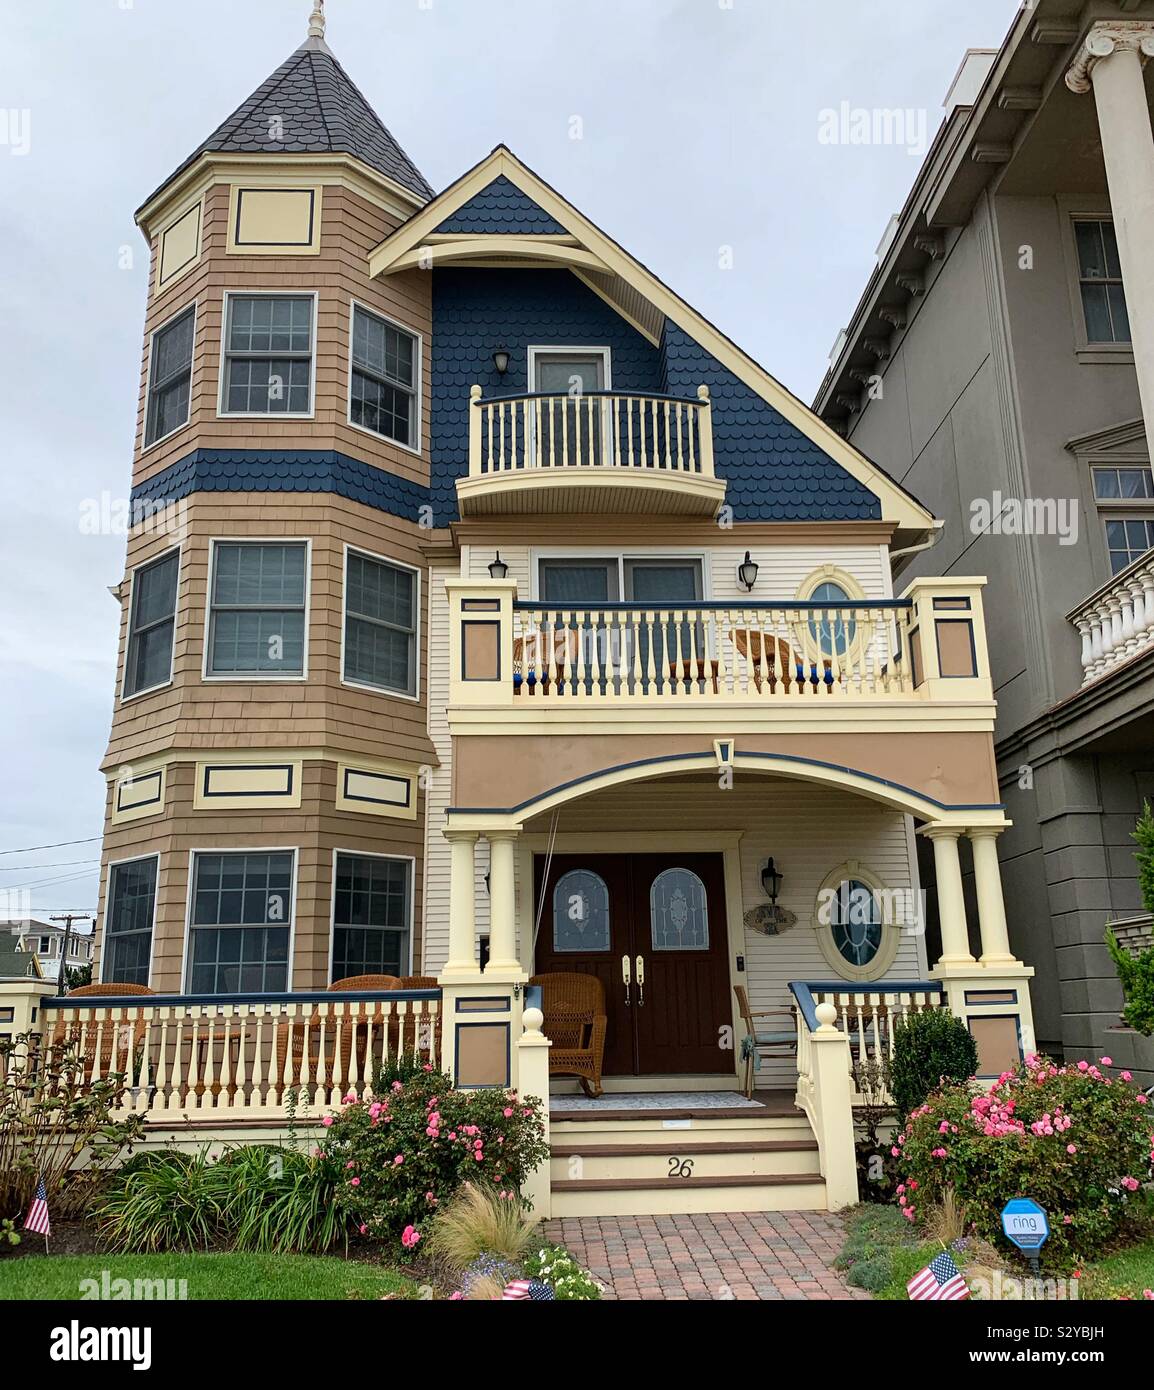 Ein Haus in Ocean Grove, Neptun Township, Monmouth County, New Jersey, United States Stockfoto